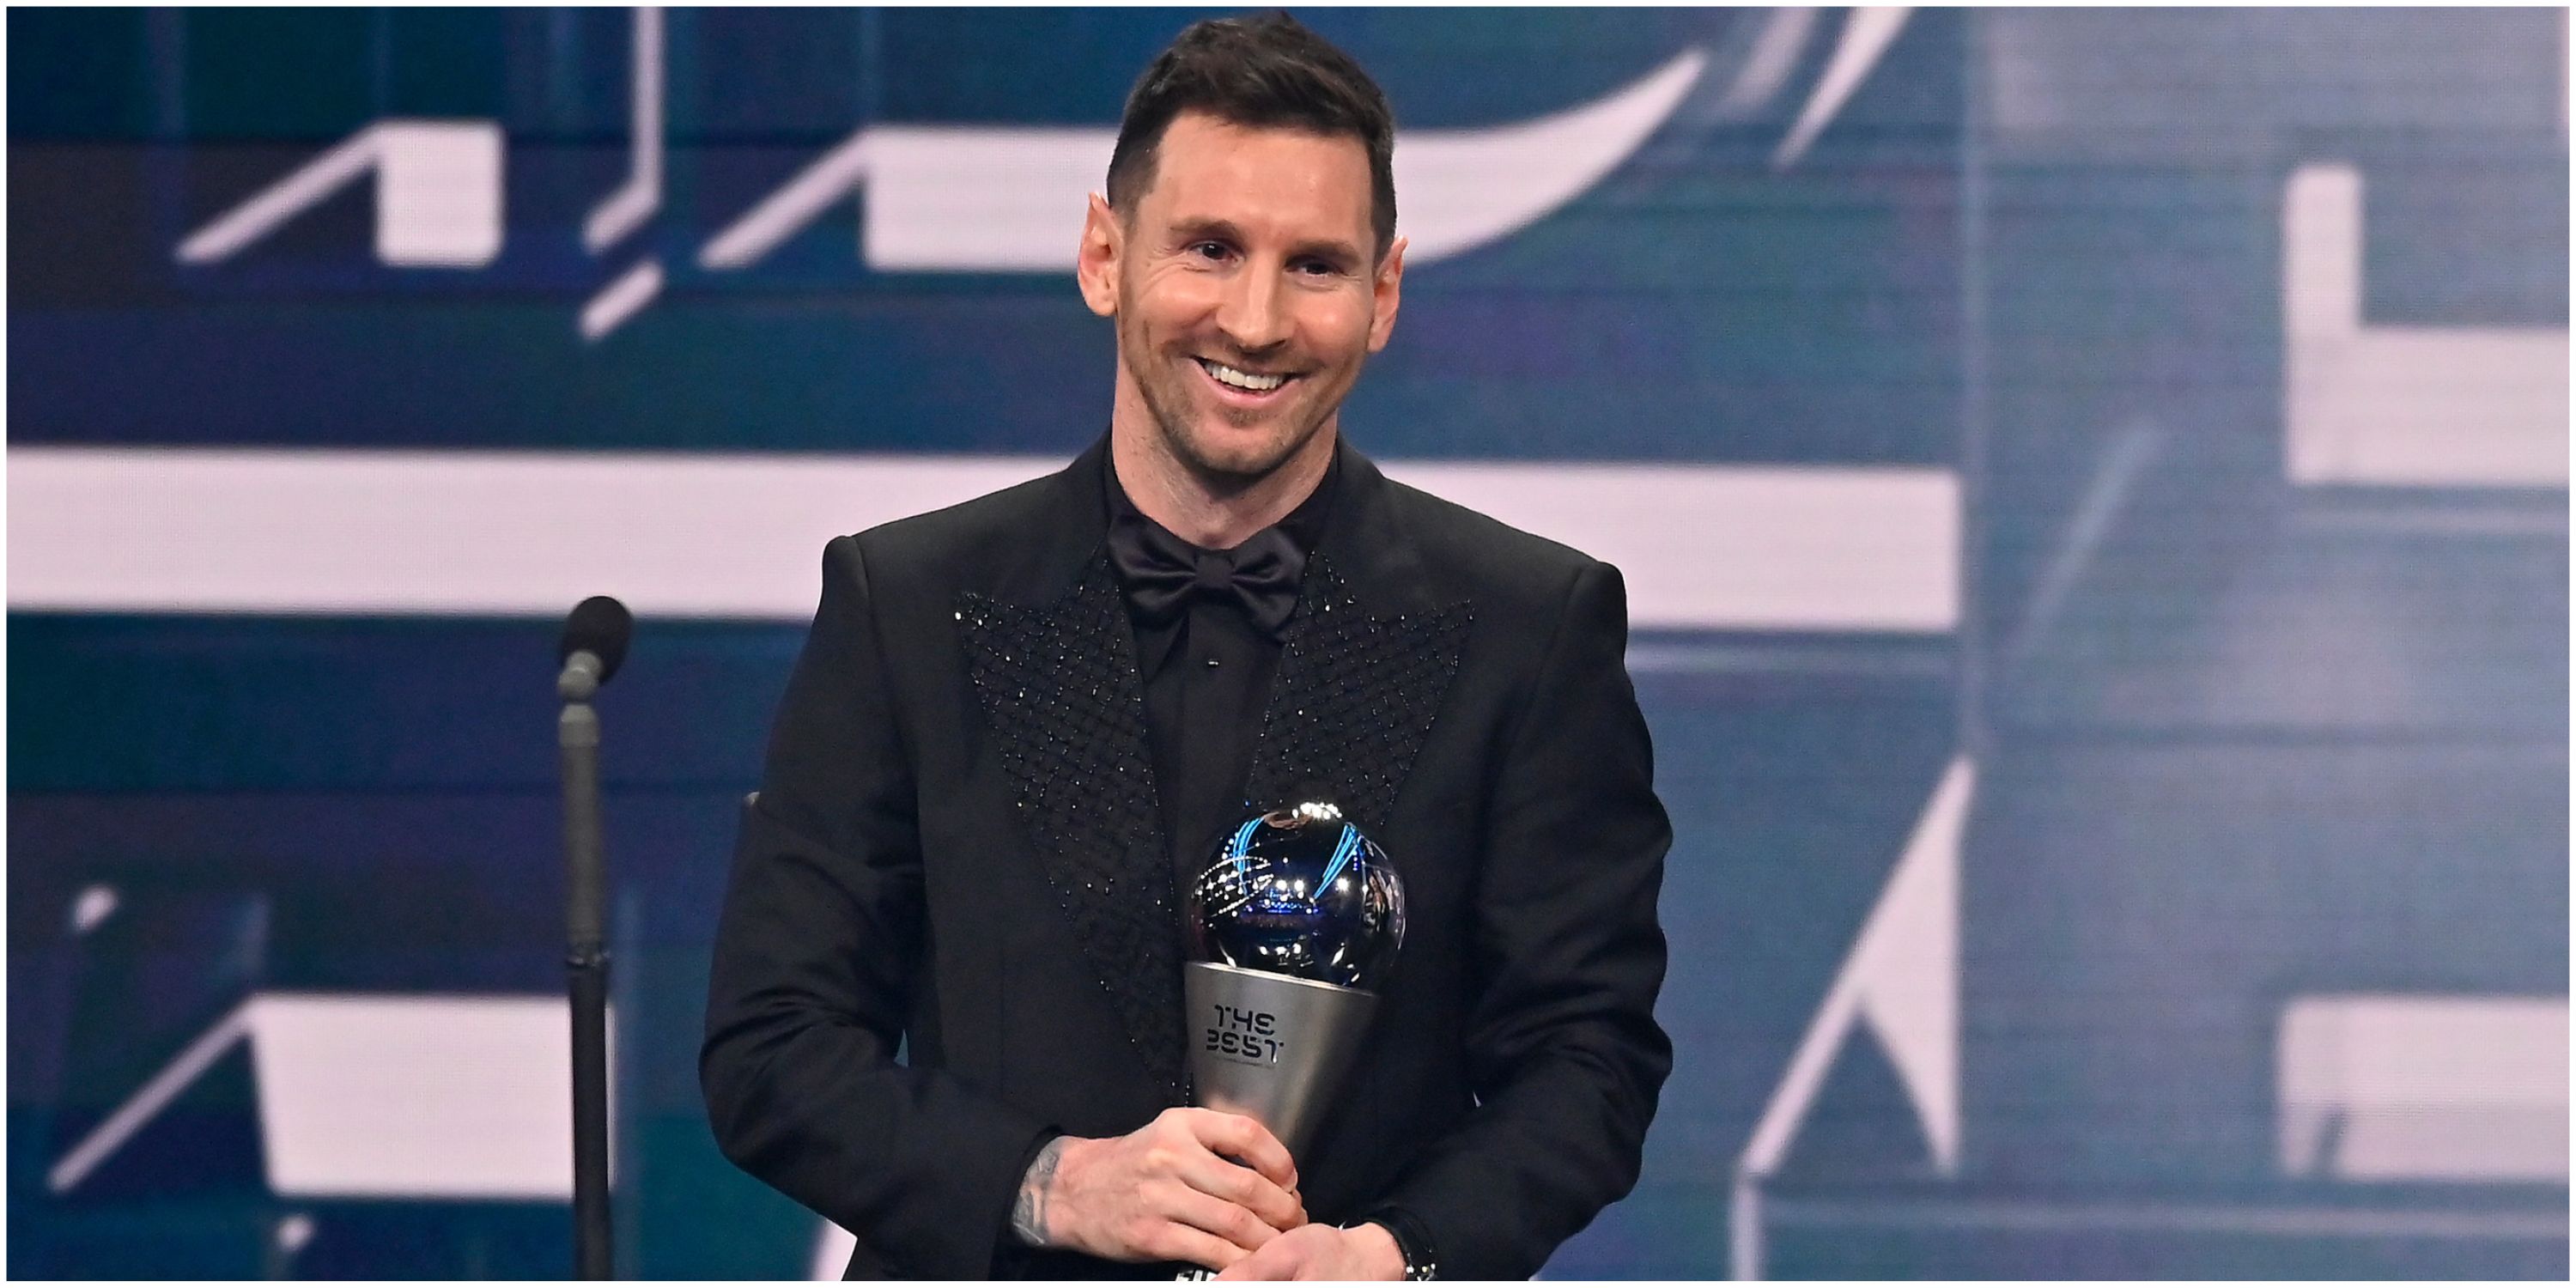 Lionel Messi has won so many individual awards that he's now giving them away